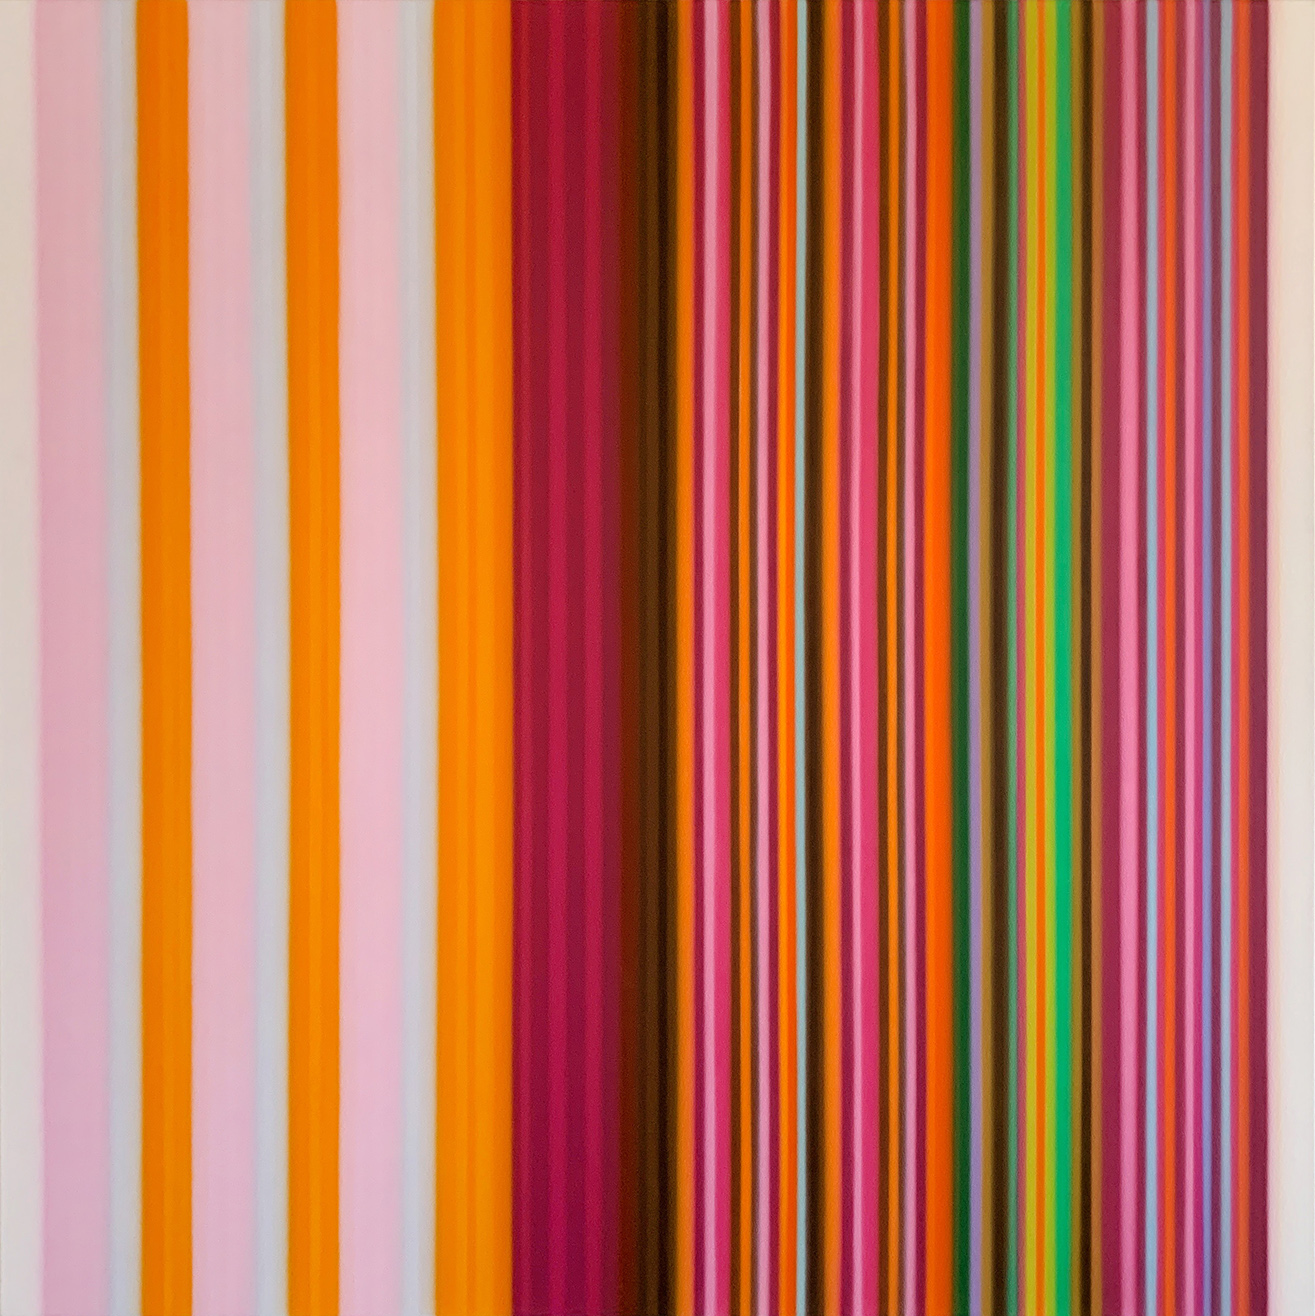 Tim Bavington painting of colorful stripes with pink and orange